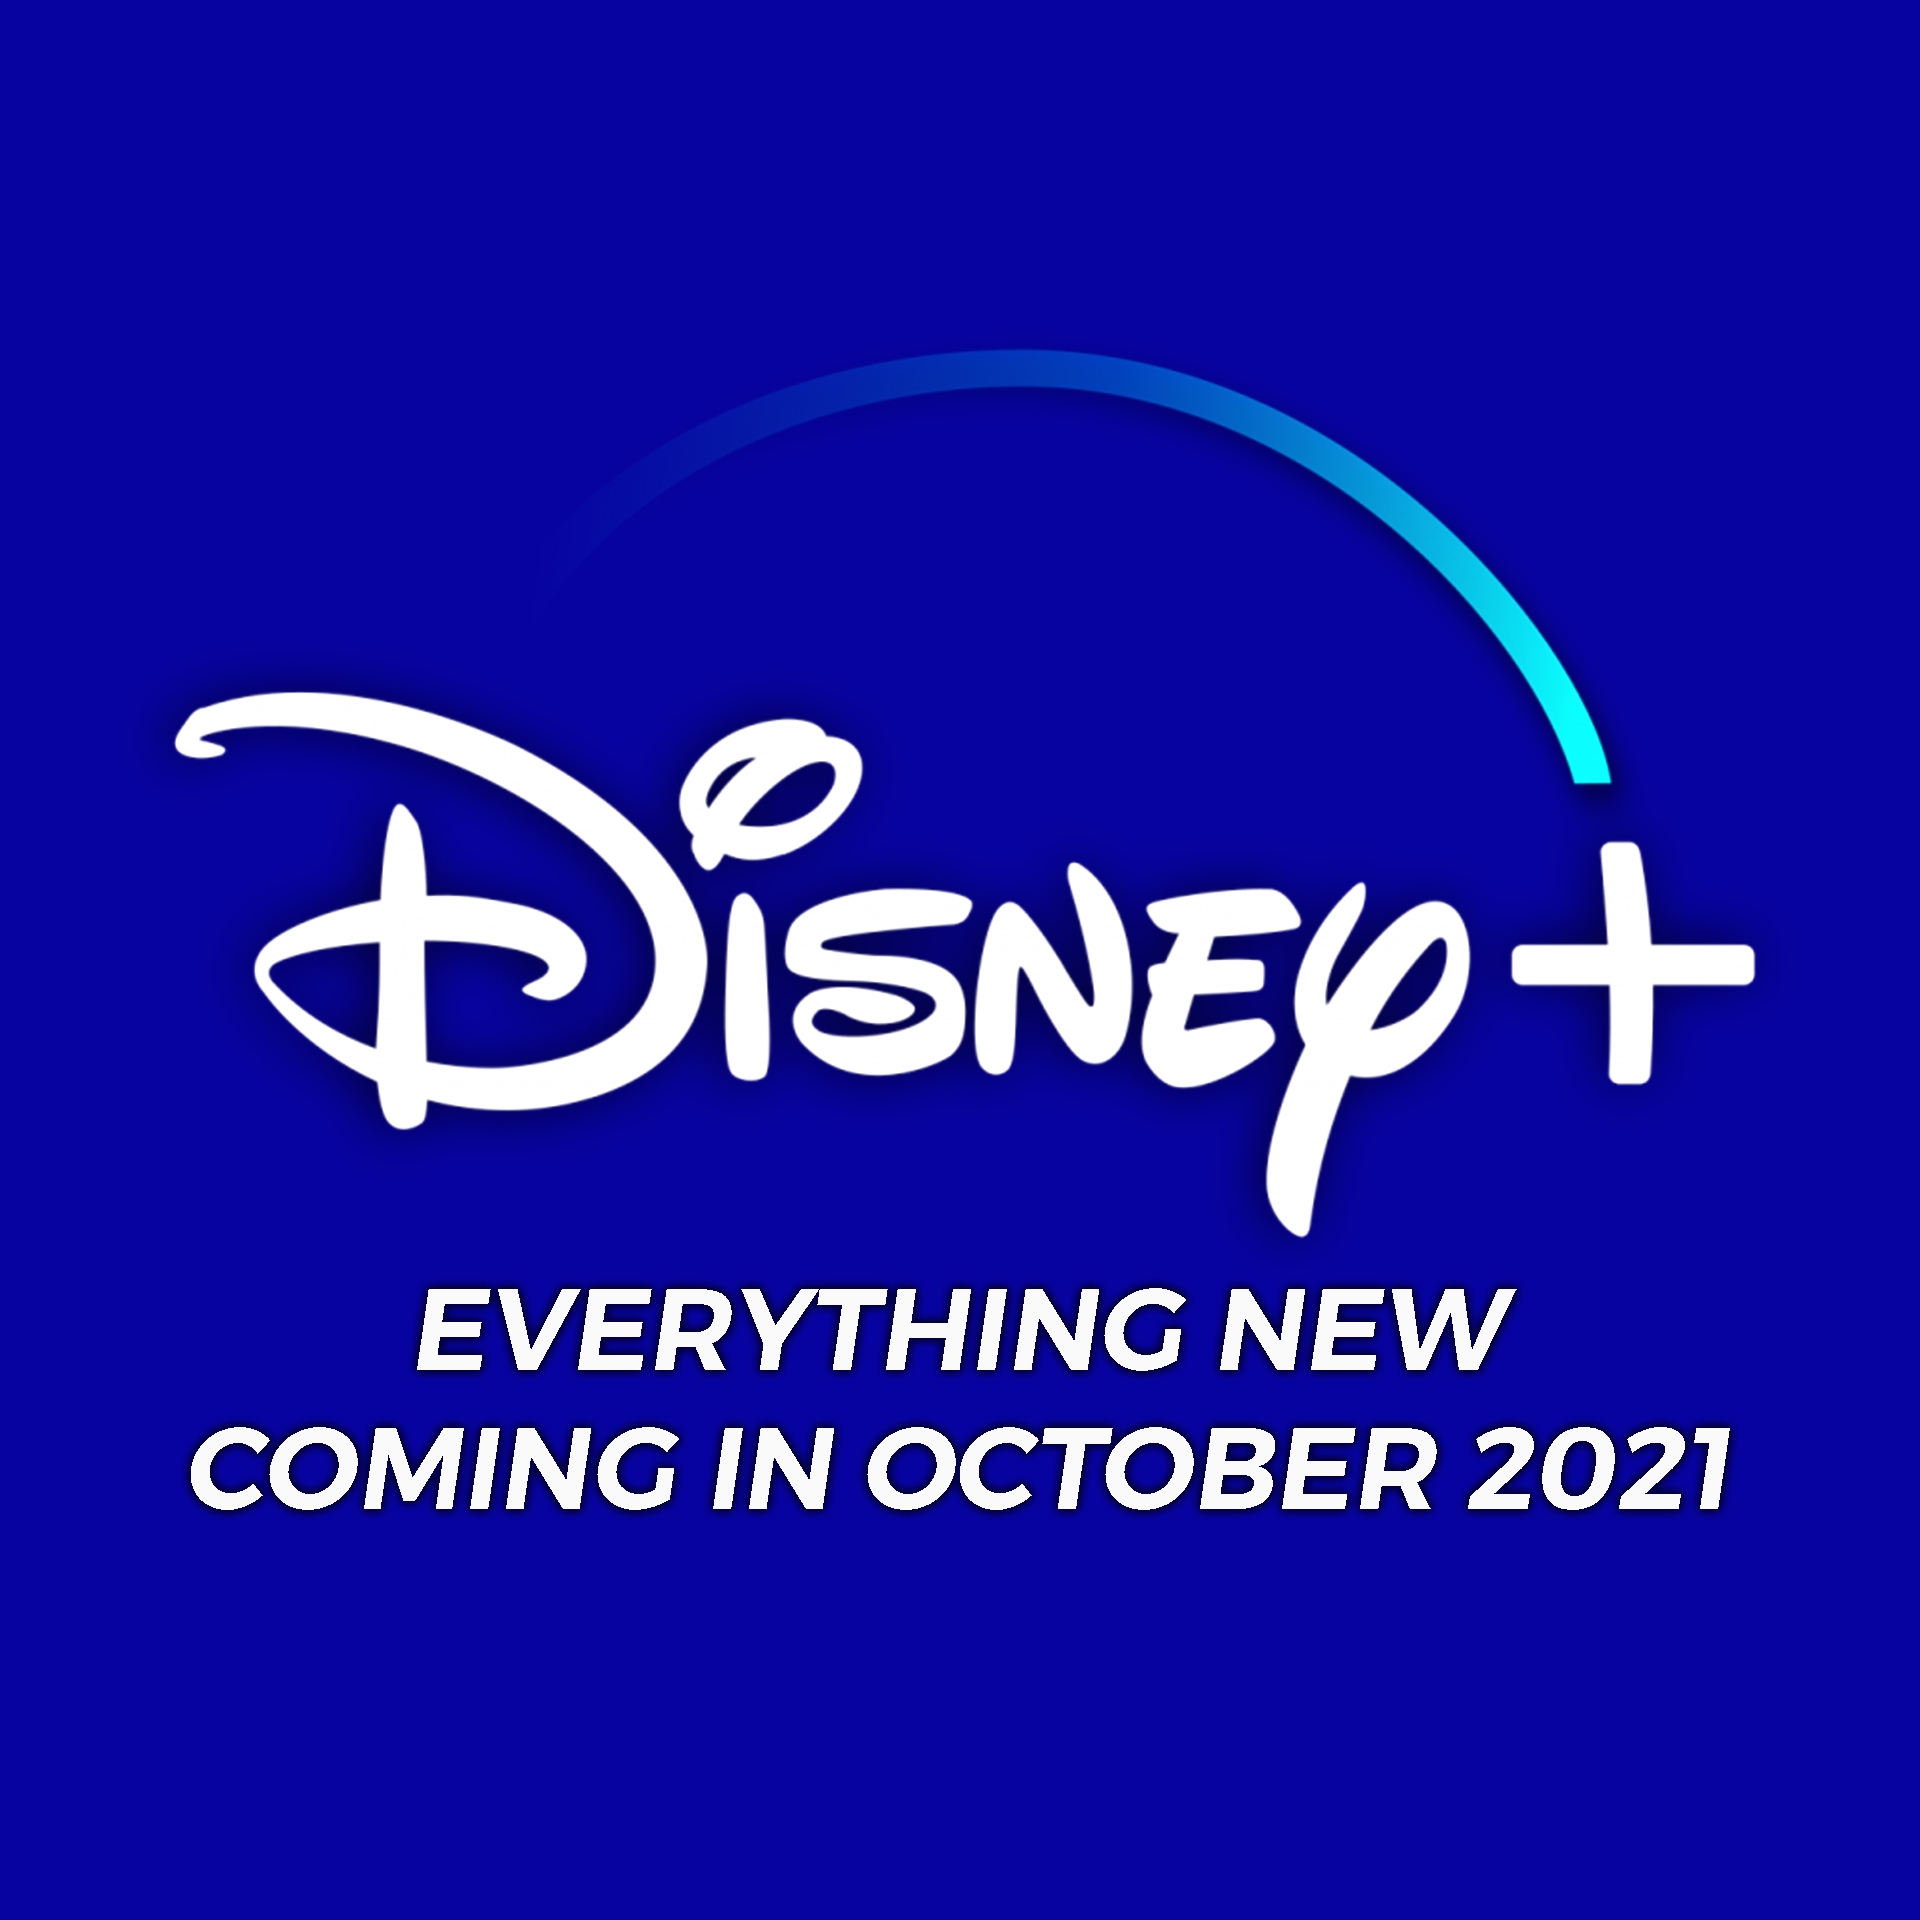 Everything New Coming To Disney+ In October 2021